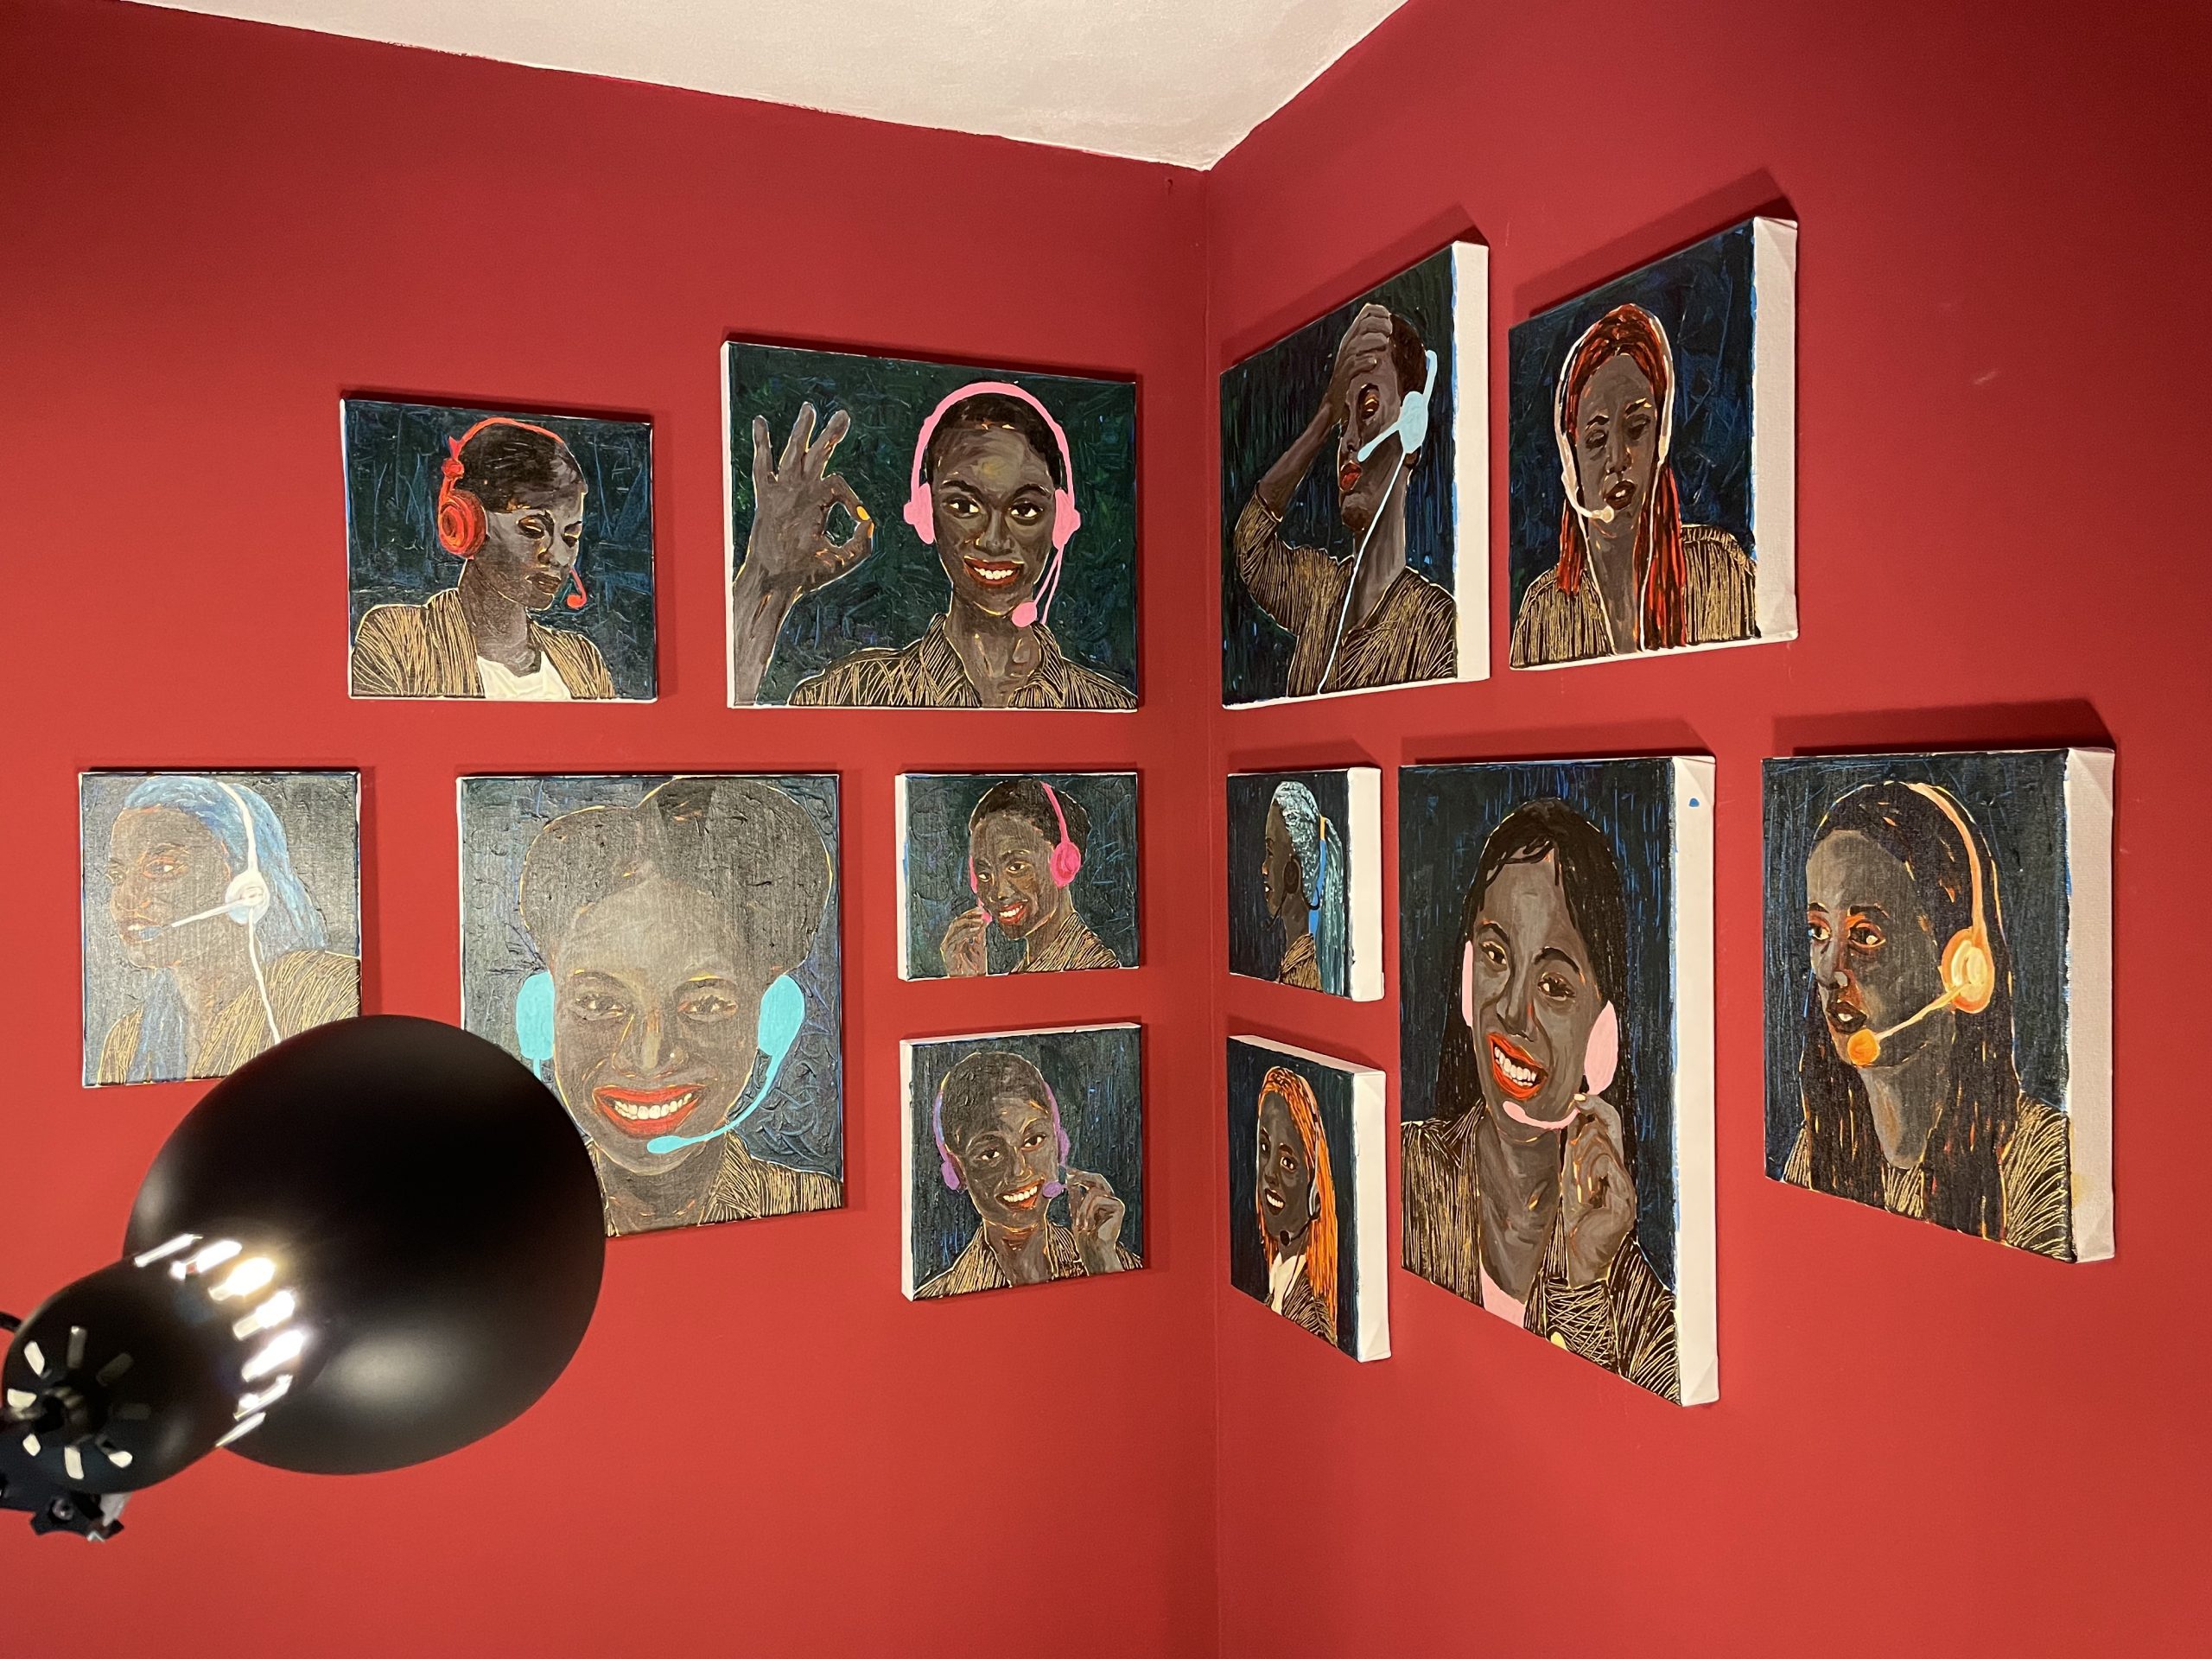 African and Diaspora Artists - Uganda Pavilion, Installation view of "RADIANCE: They dream In Time" curated by Shaheen Merali. Photo credit: Adéọlá Ọlágúnjú for TSA Art Magazine